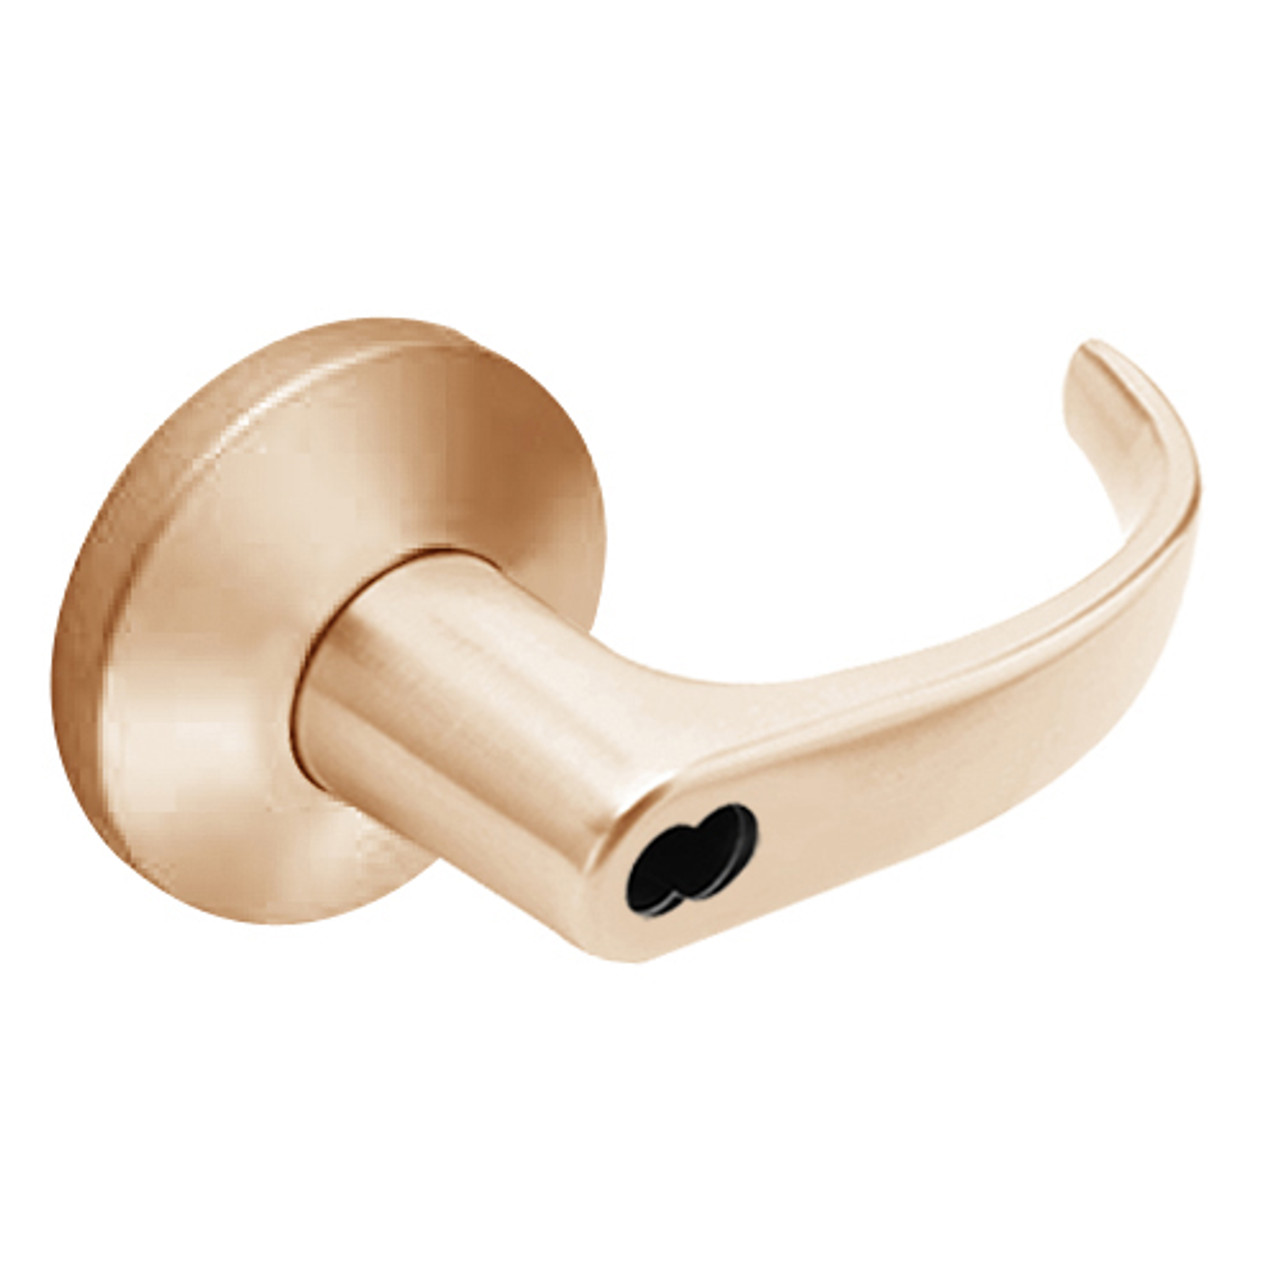 9K37E14KS3611 Best 9K Series Service Station Cylindrical Lever Locks with Curved with Return Lever Design Accept 7 Pin Best Core in Bright Bronze